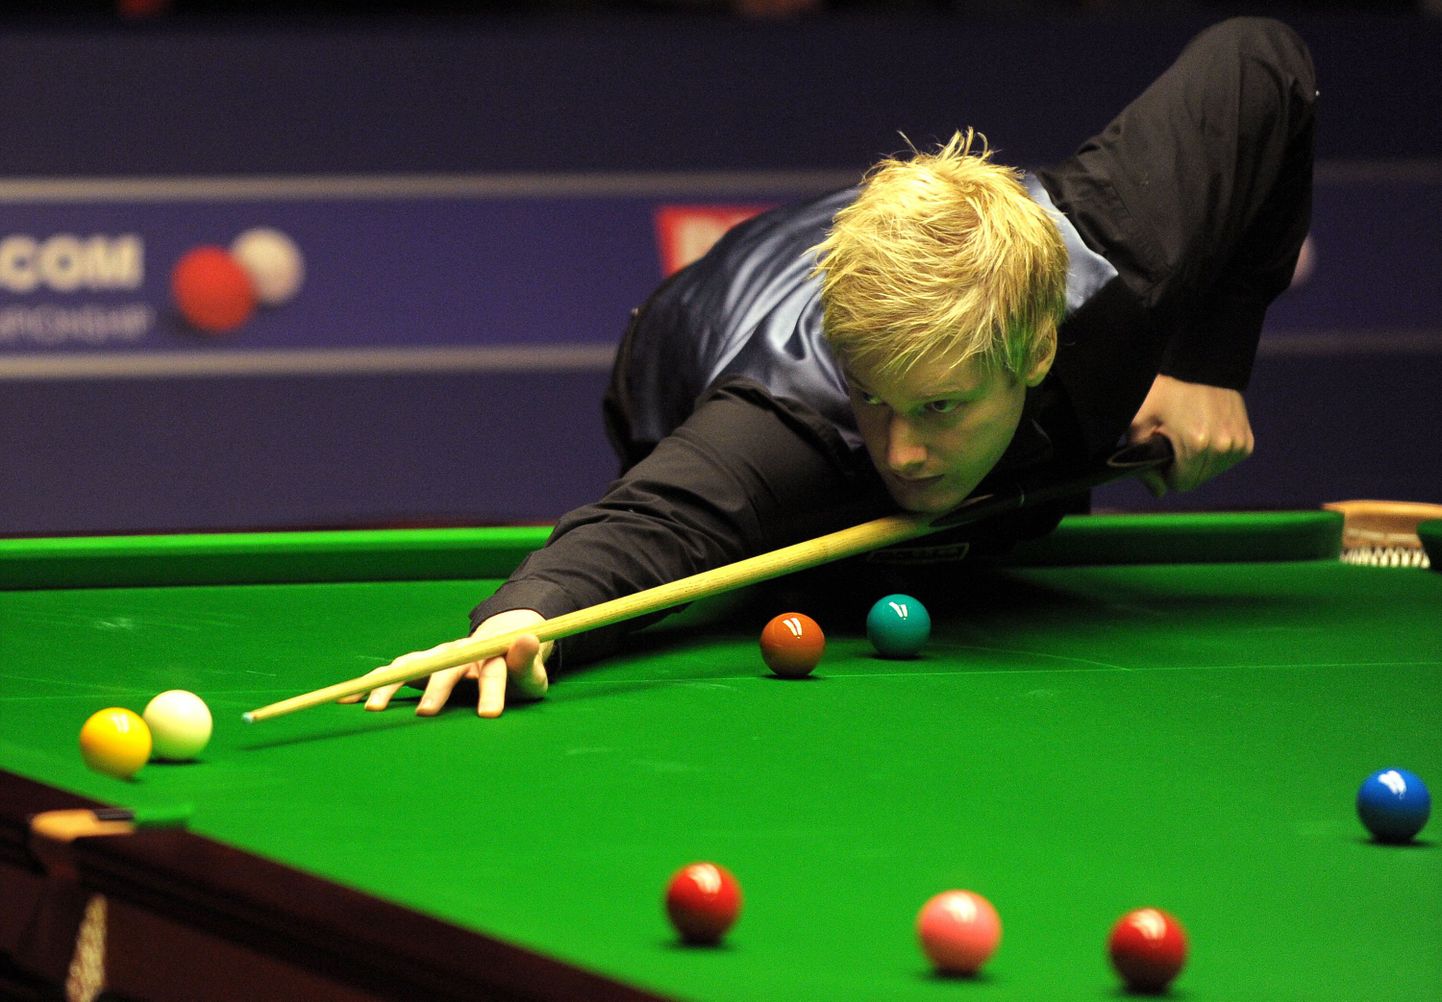 Neil Robertson of Australia plays a shot during the semi-final of the World Championship Snooker tournament against Ali Carter of Great Britain (not pictured) at the Crucible Theatre in Sheffield, England, on April 30, 2010. AFP PHOTO/Andrew Yates